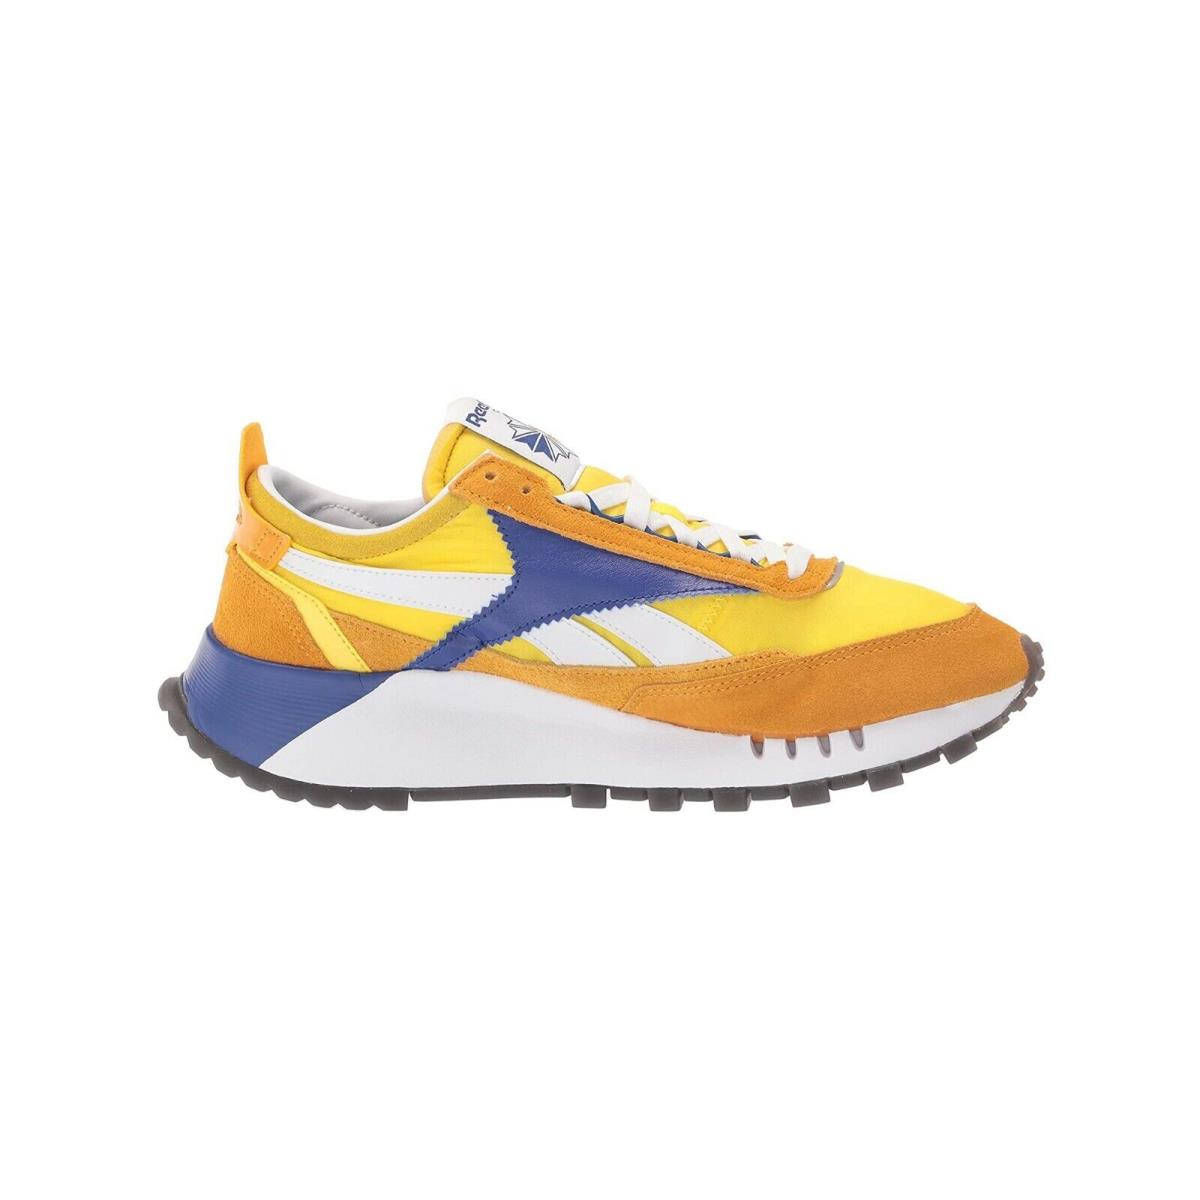 Reebok shoes Classic Legacy - Multicolor , Co Gold Bright Yellow Manufacturer 0